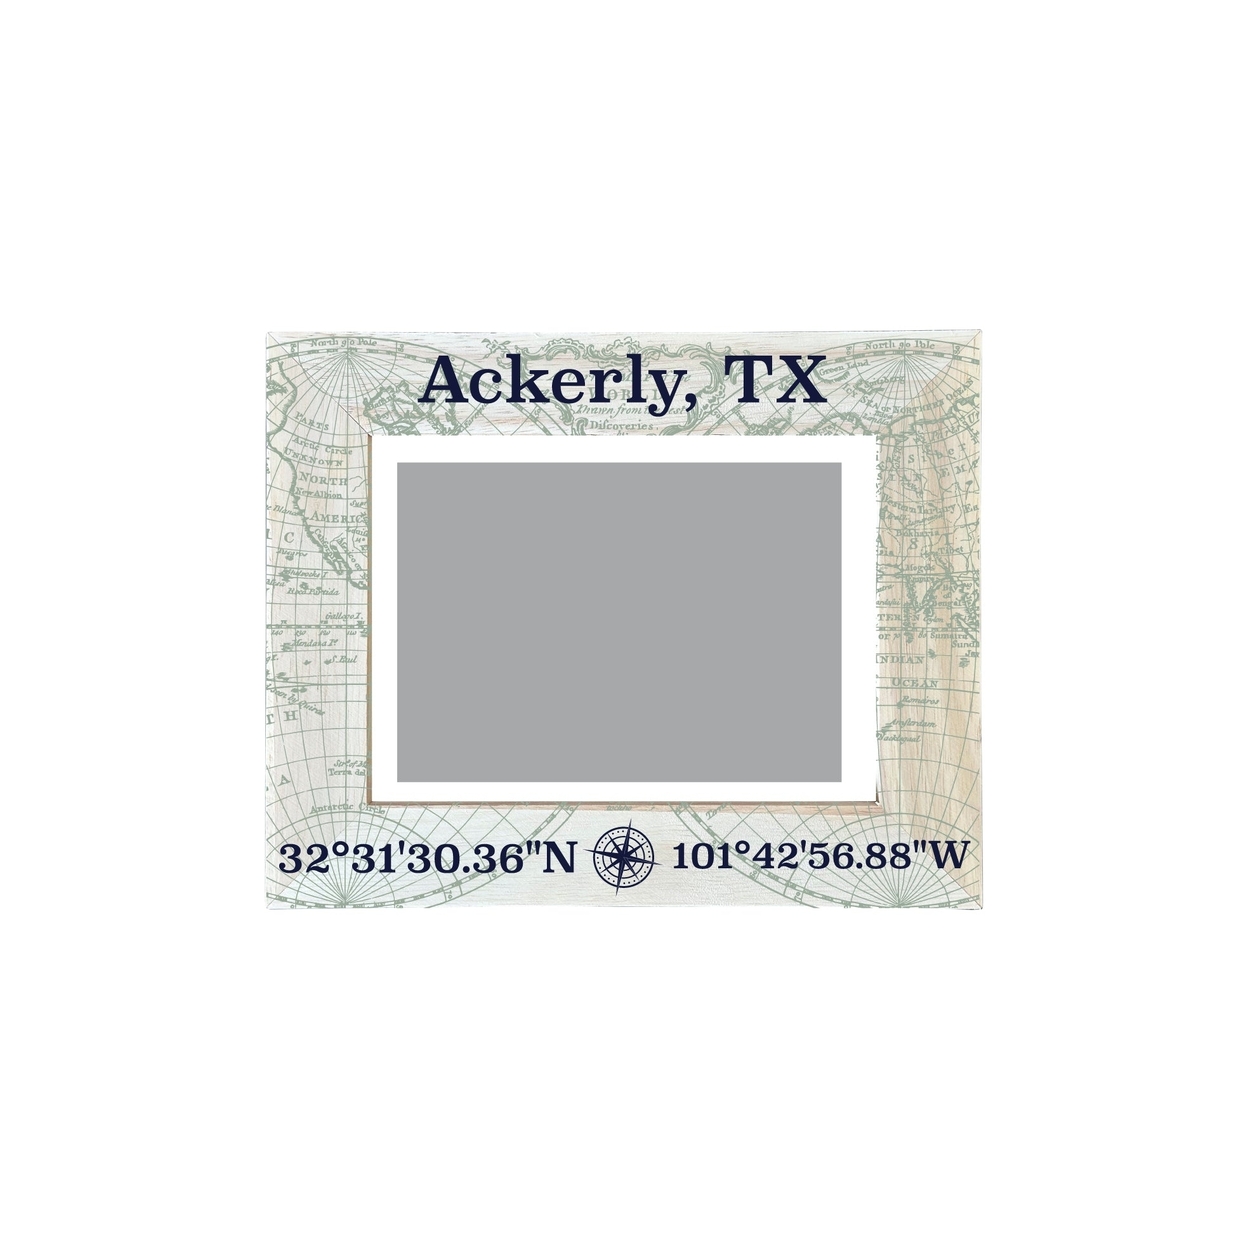 R and R Imports Ackerly Texas Souvenir Wooden Photo Frame Compass Coordinates Design Matted to 4 x 6"